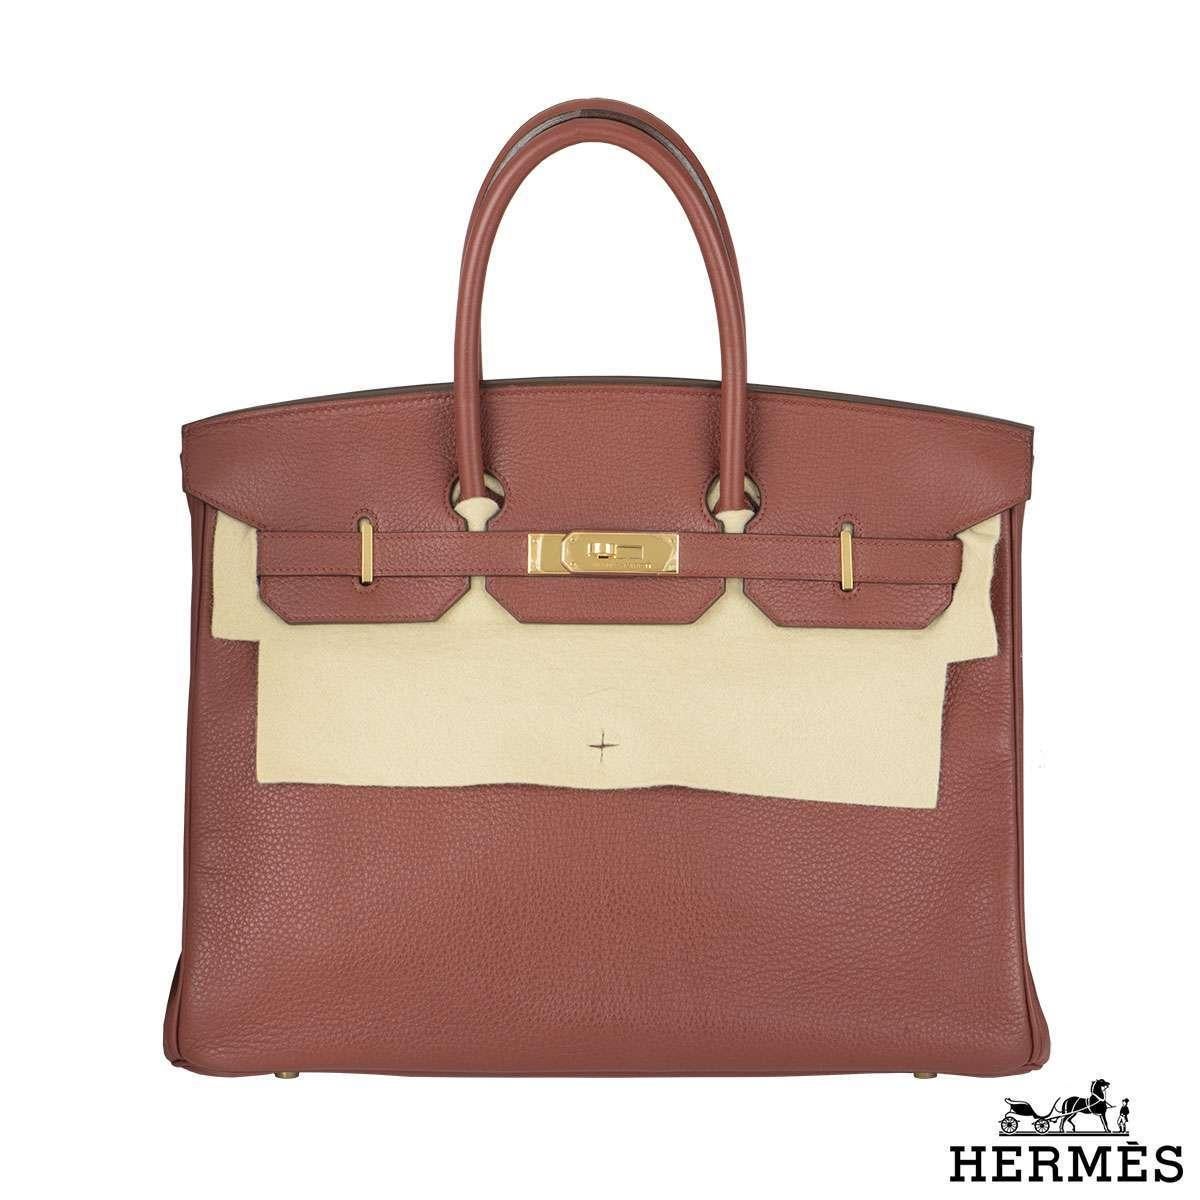 Signature Hermes 35 cm Birkin in Clemence leather in a beautiful brick red colour that contrasts elegantly with the gold hardware. This iconic bag from Hermes features gold plated hardware on its front buckle, feet and zipper. The blind stamp on it